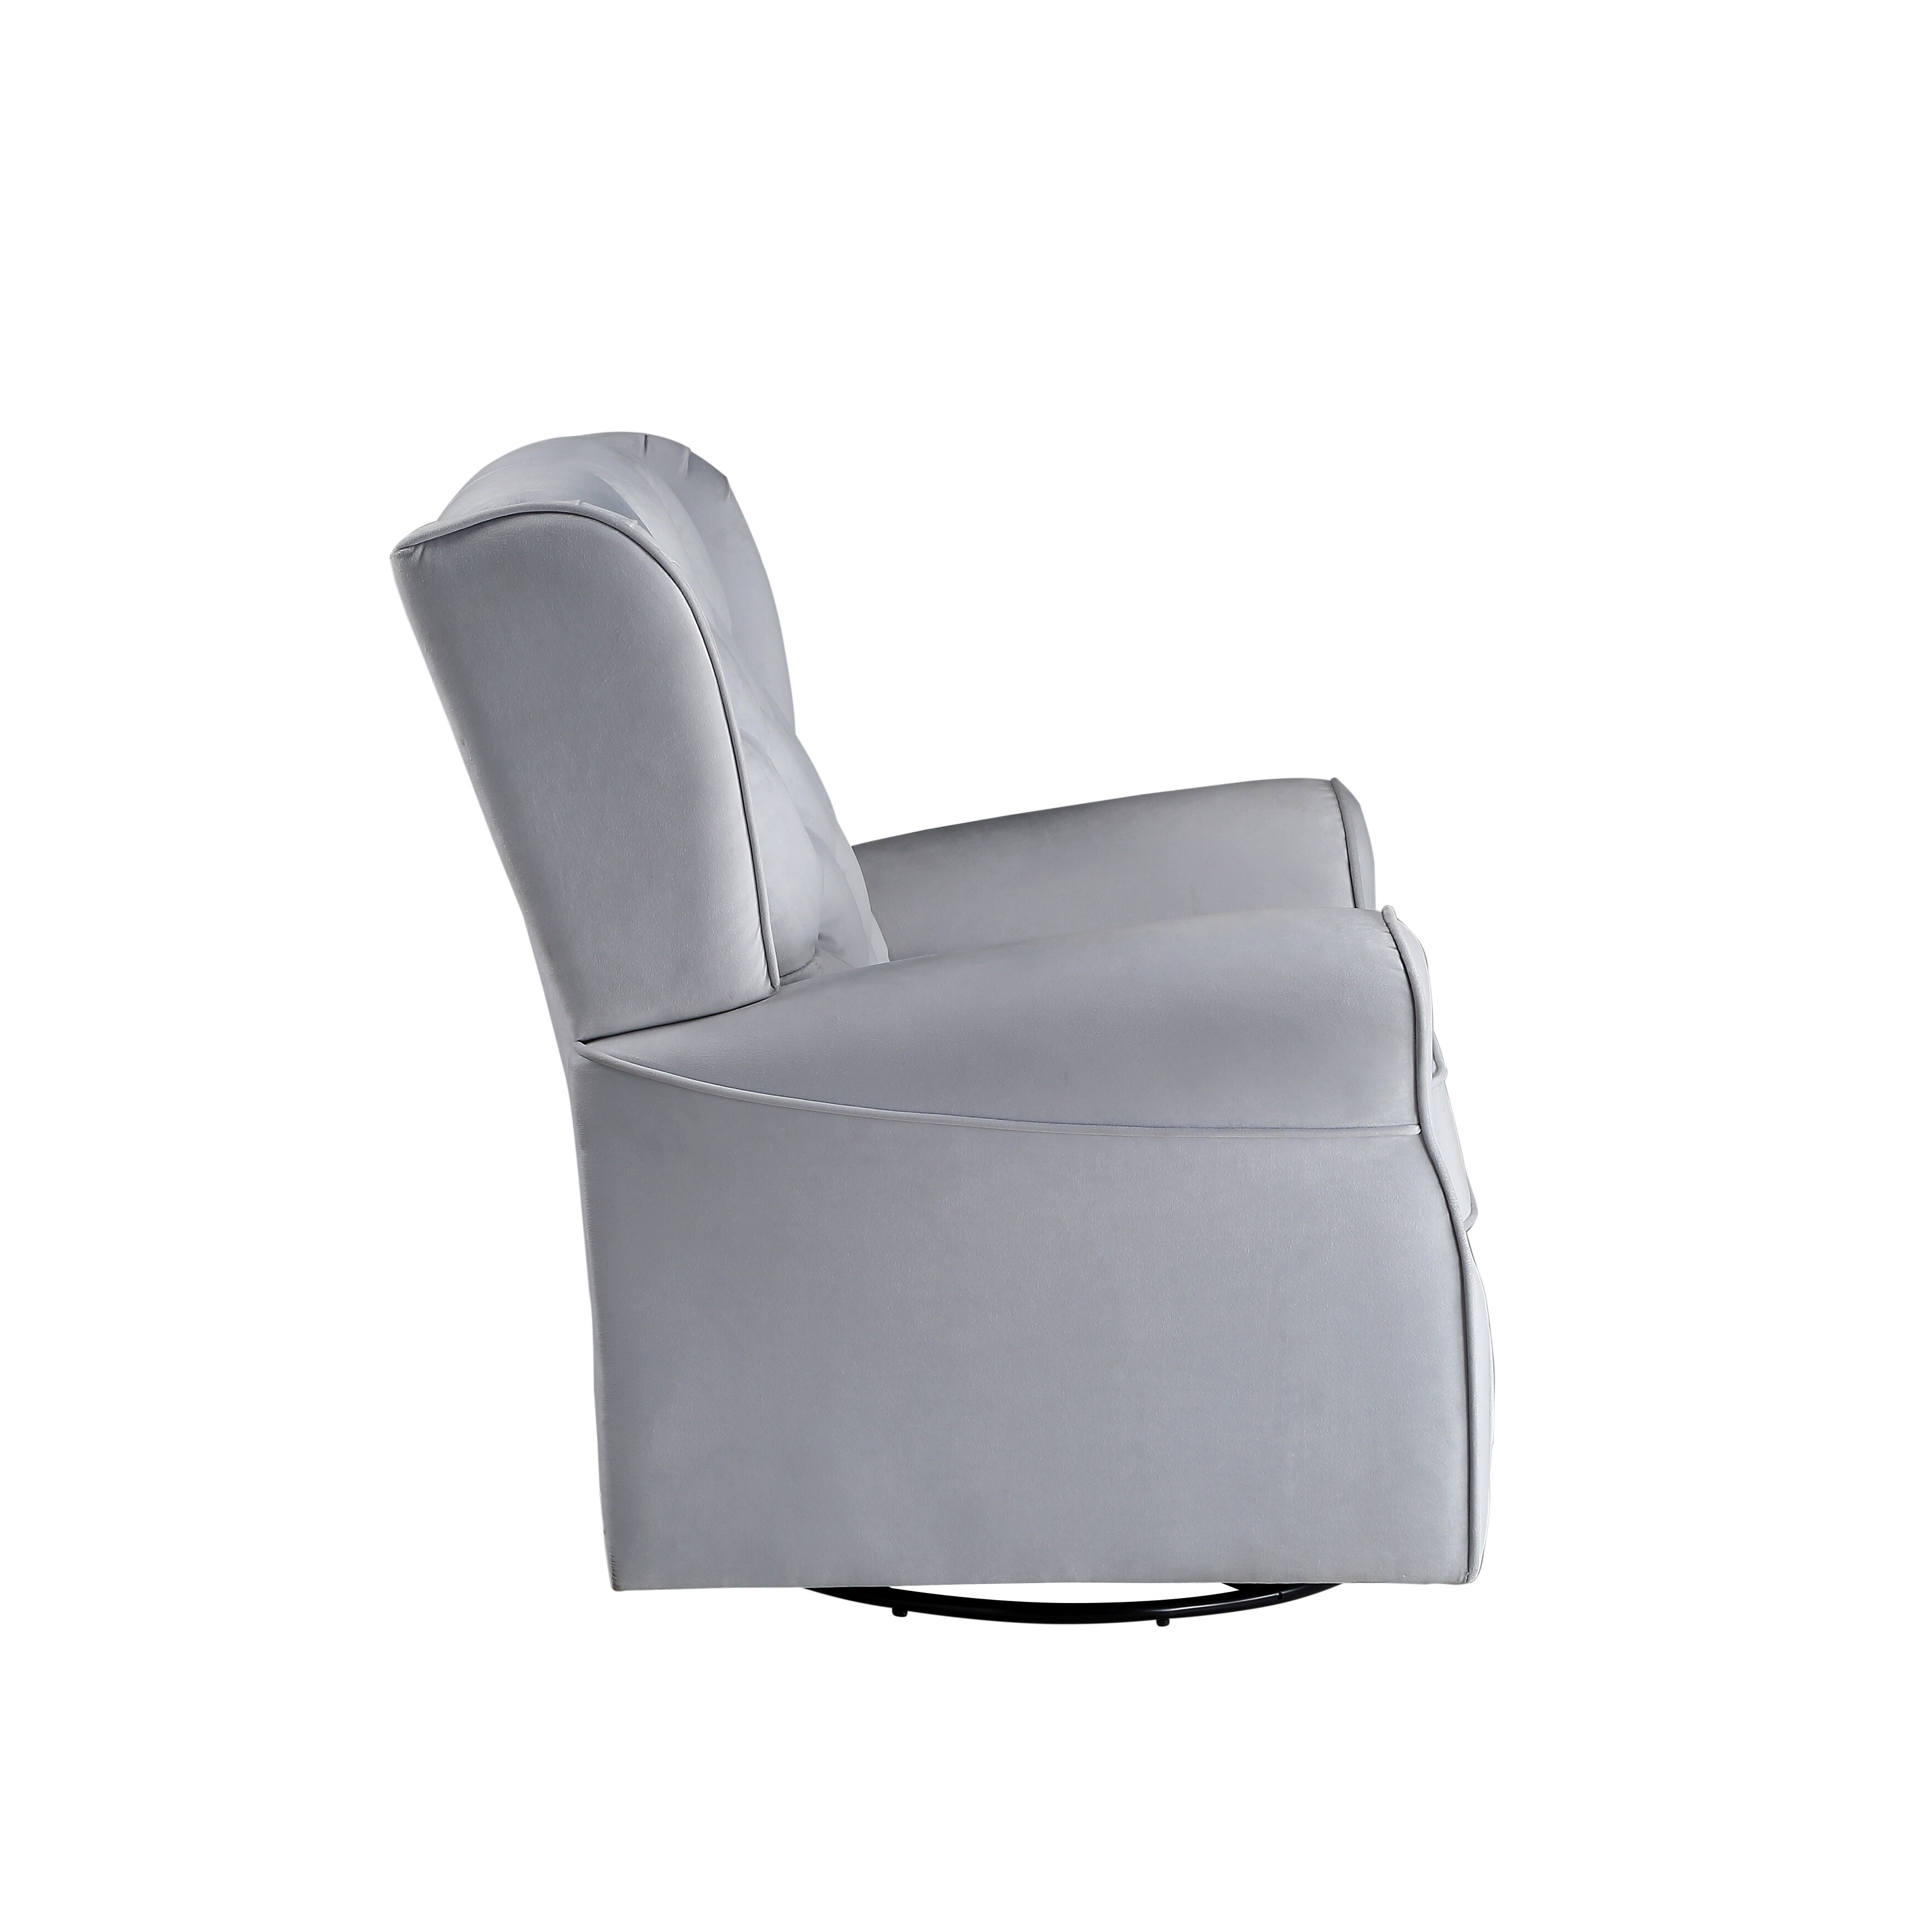 Modern Home Swivel Chair Removable Cushion Cover and Button Tufted on Back Cushion Recliners with Glider & Metal Base Leg